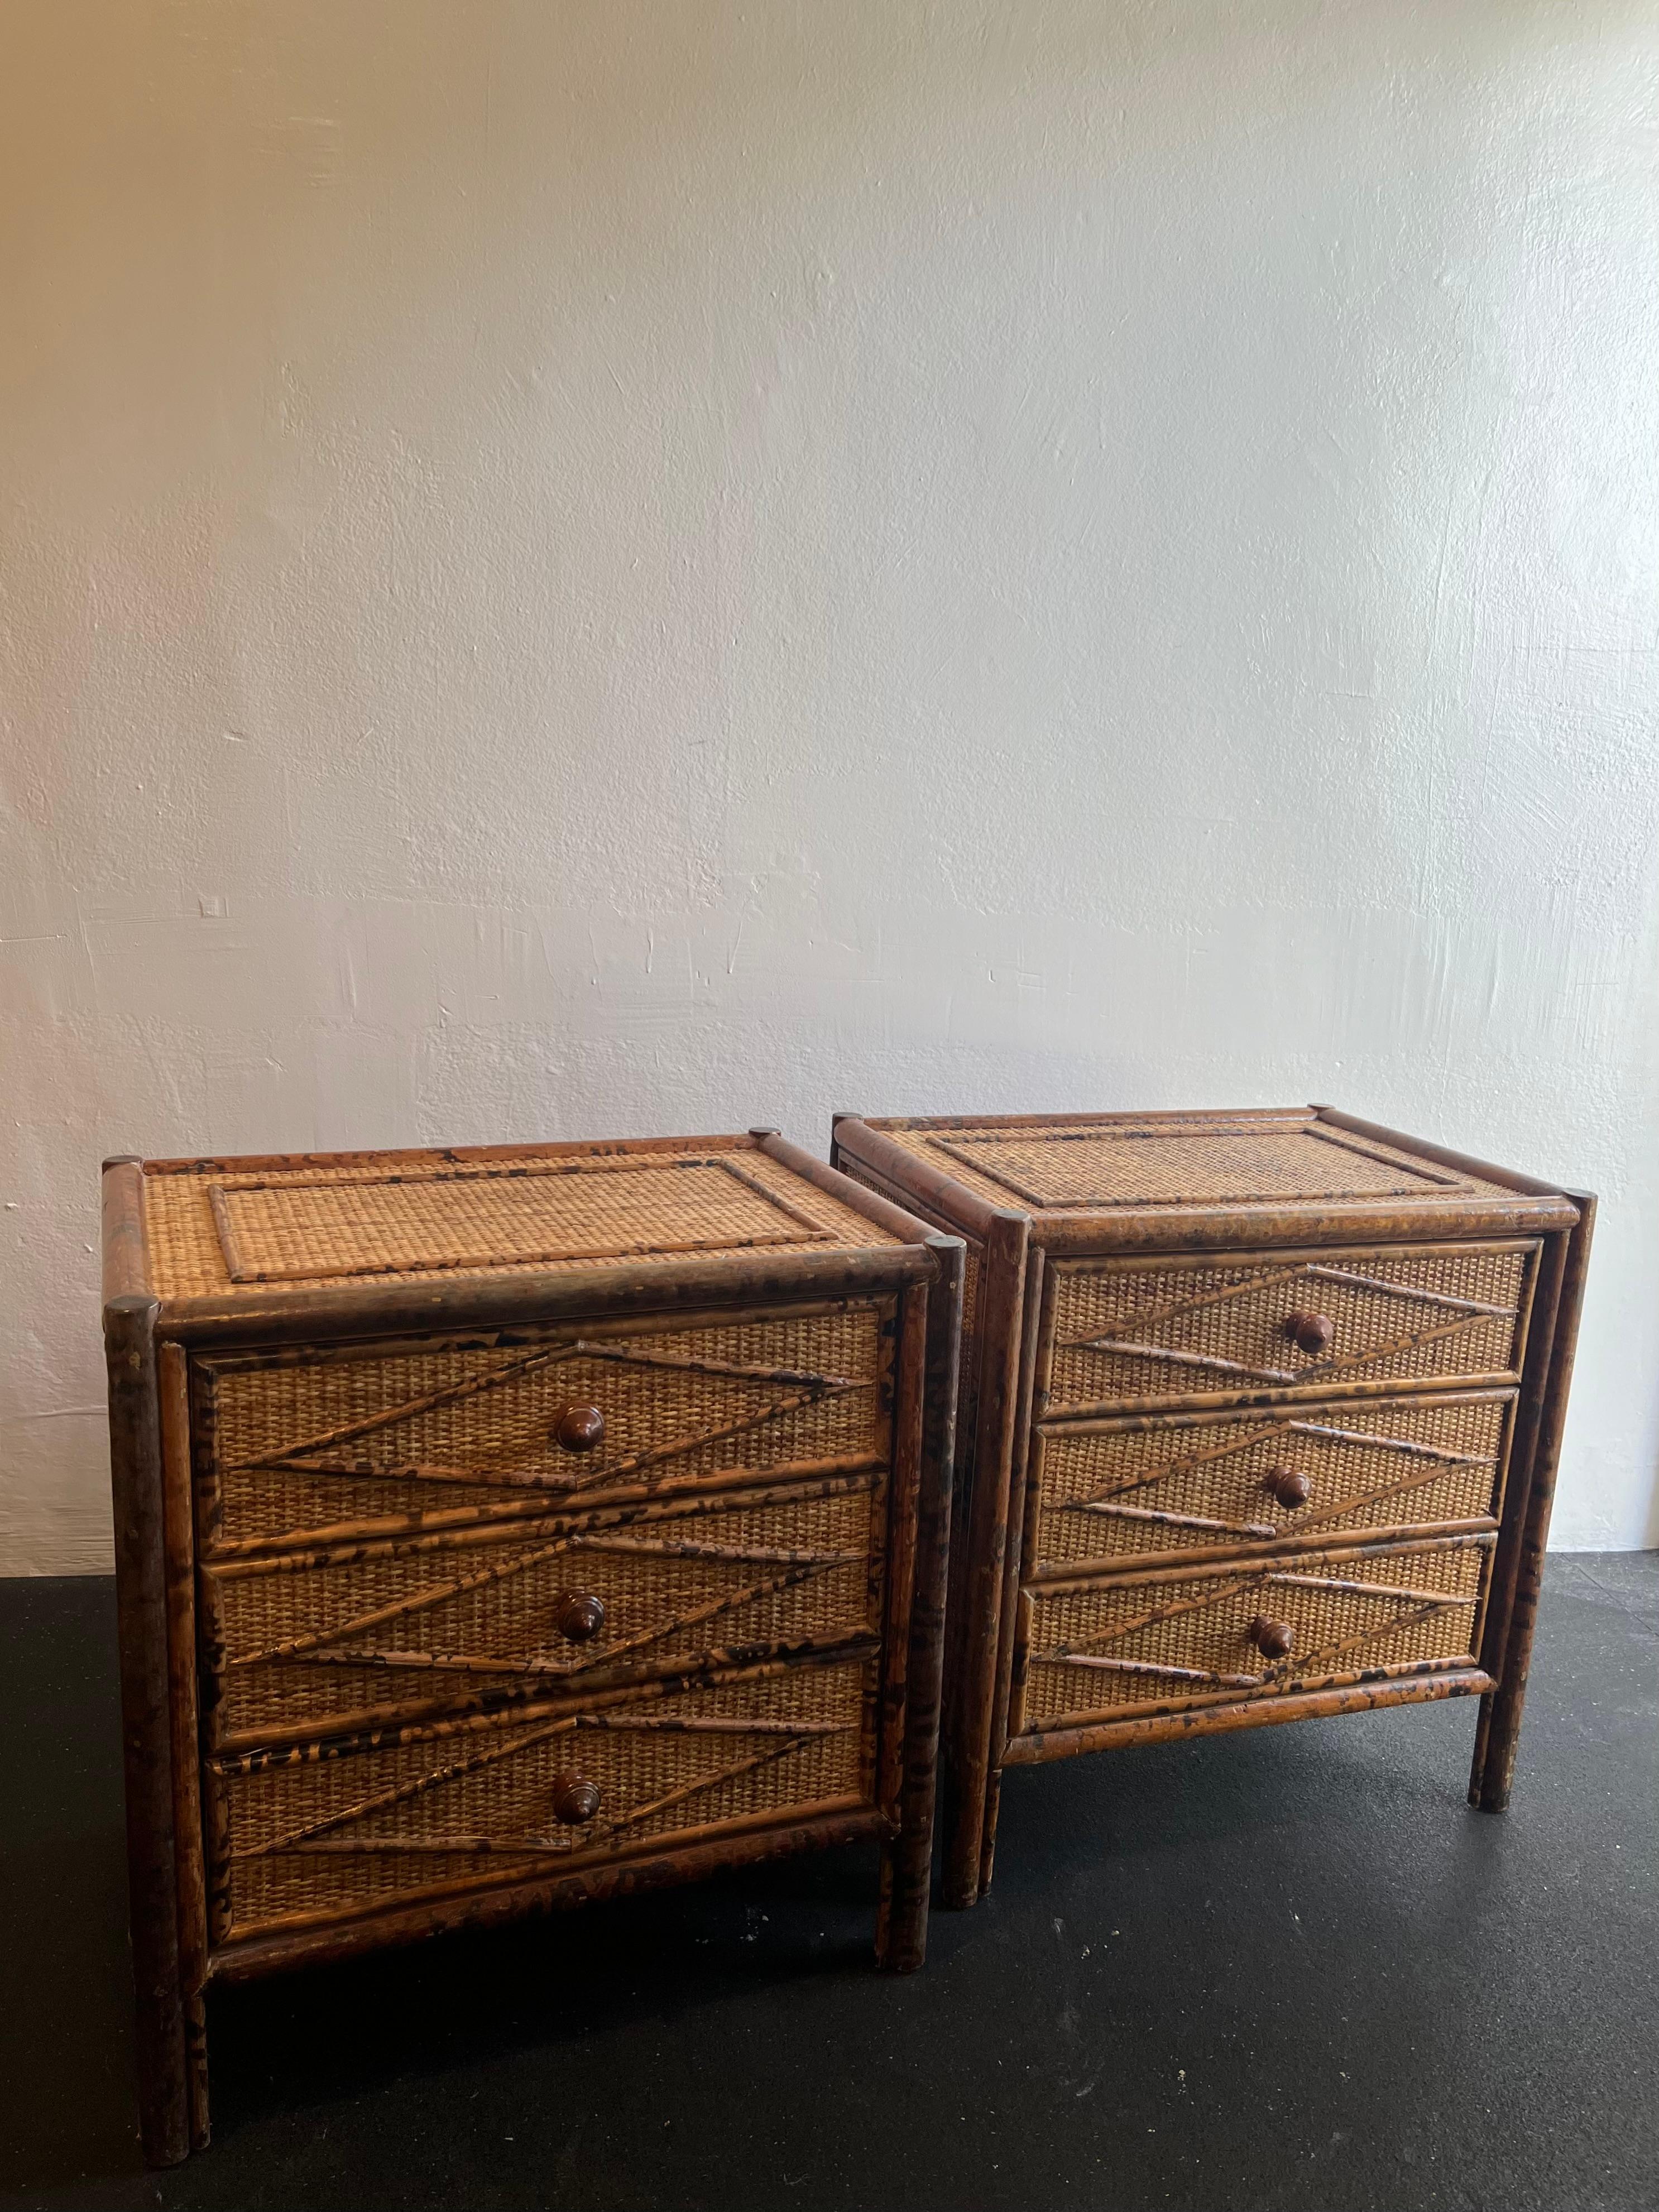 British colonial style burnt bamboo and cane pair of nightstands. Wear to finish of cane and bamboo (please refer to photos). Additional photos available upon request.

Would work well in a variety of interiors such as modern, mid century modern,